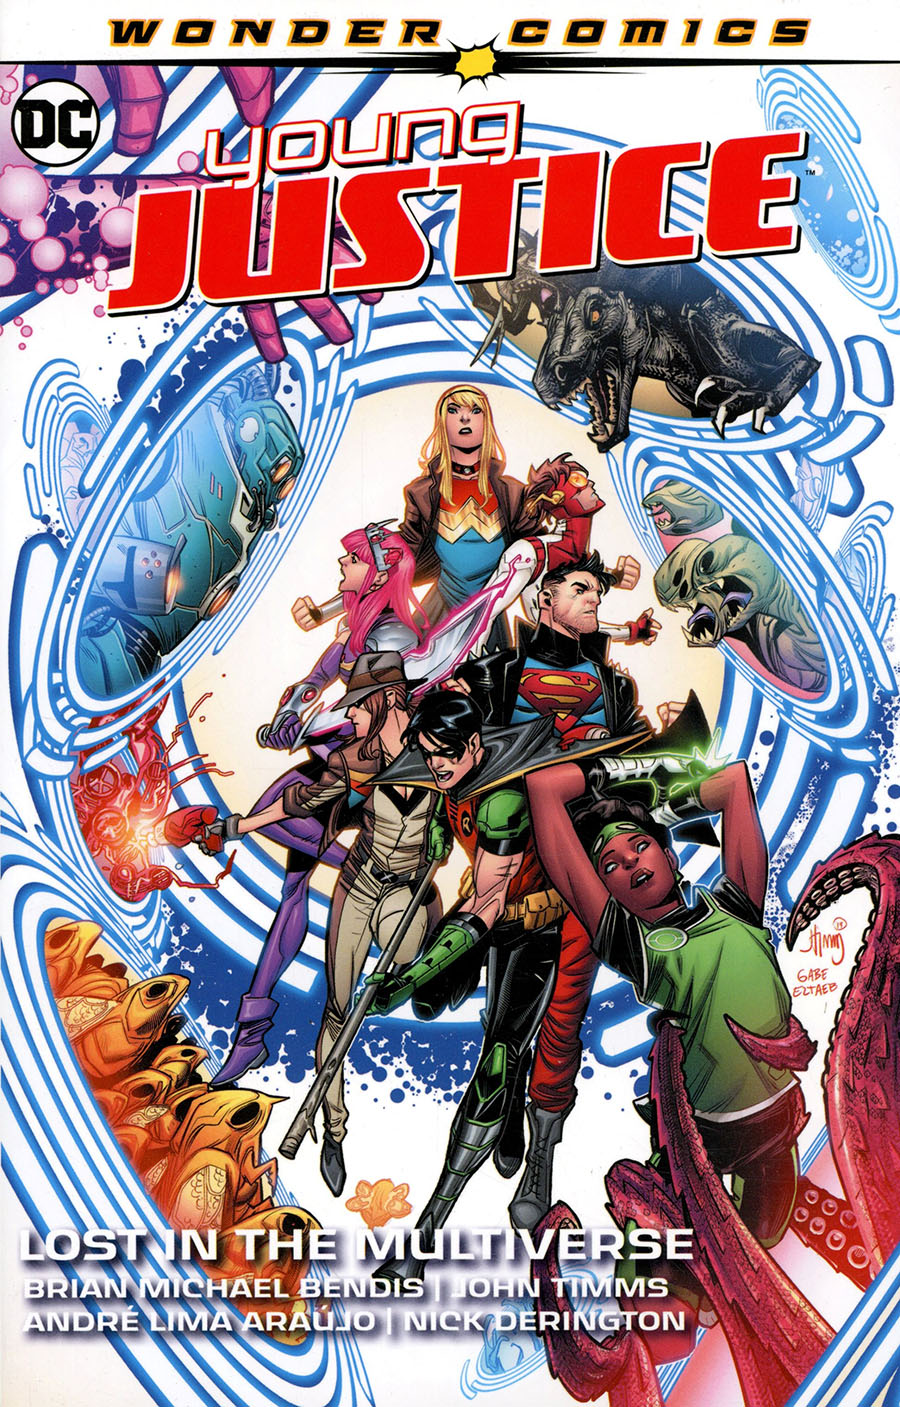 Young Justice (2019) Vol 2 Lost In The Multiverse TP